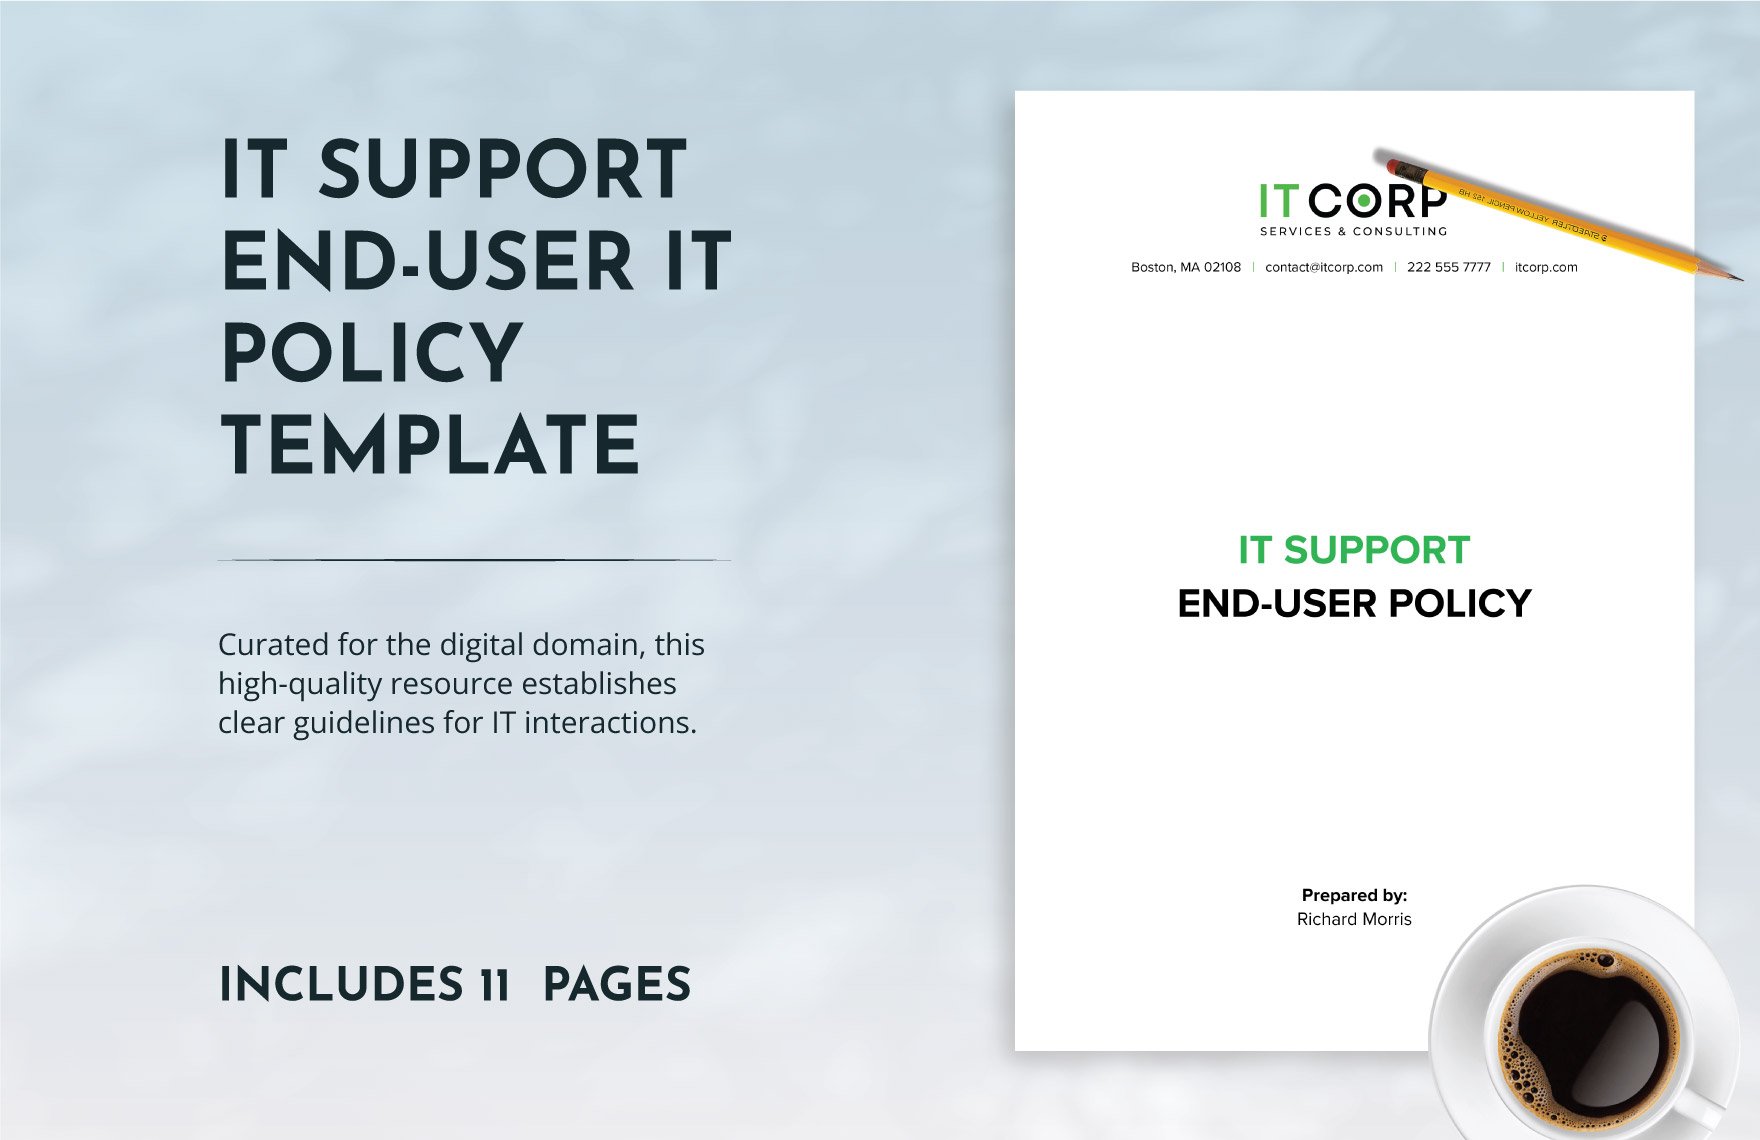 IT Support End-User Policy Template